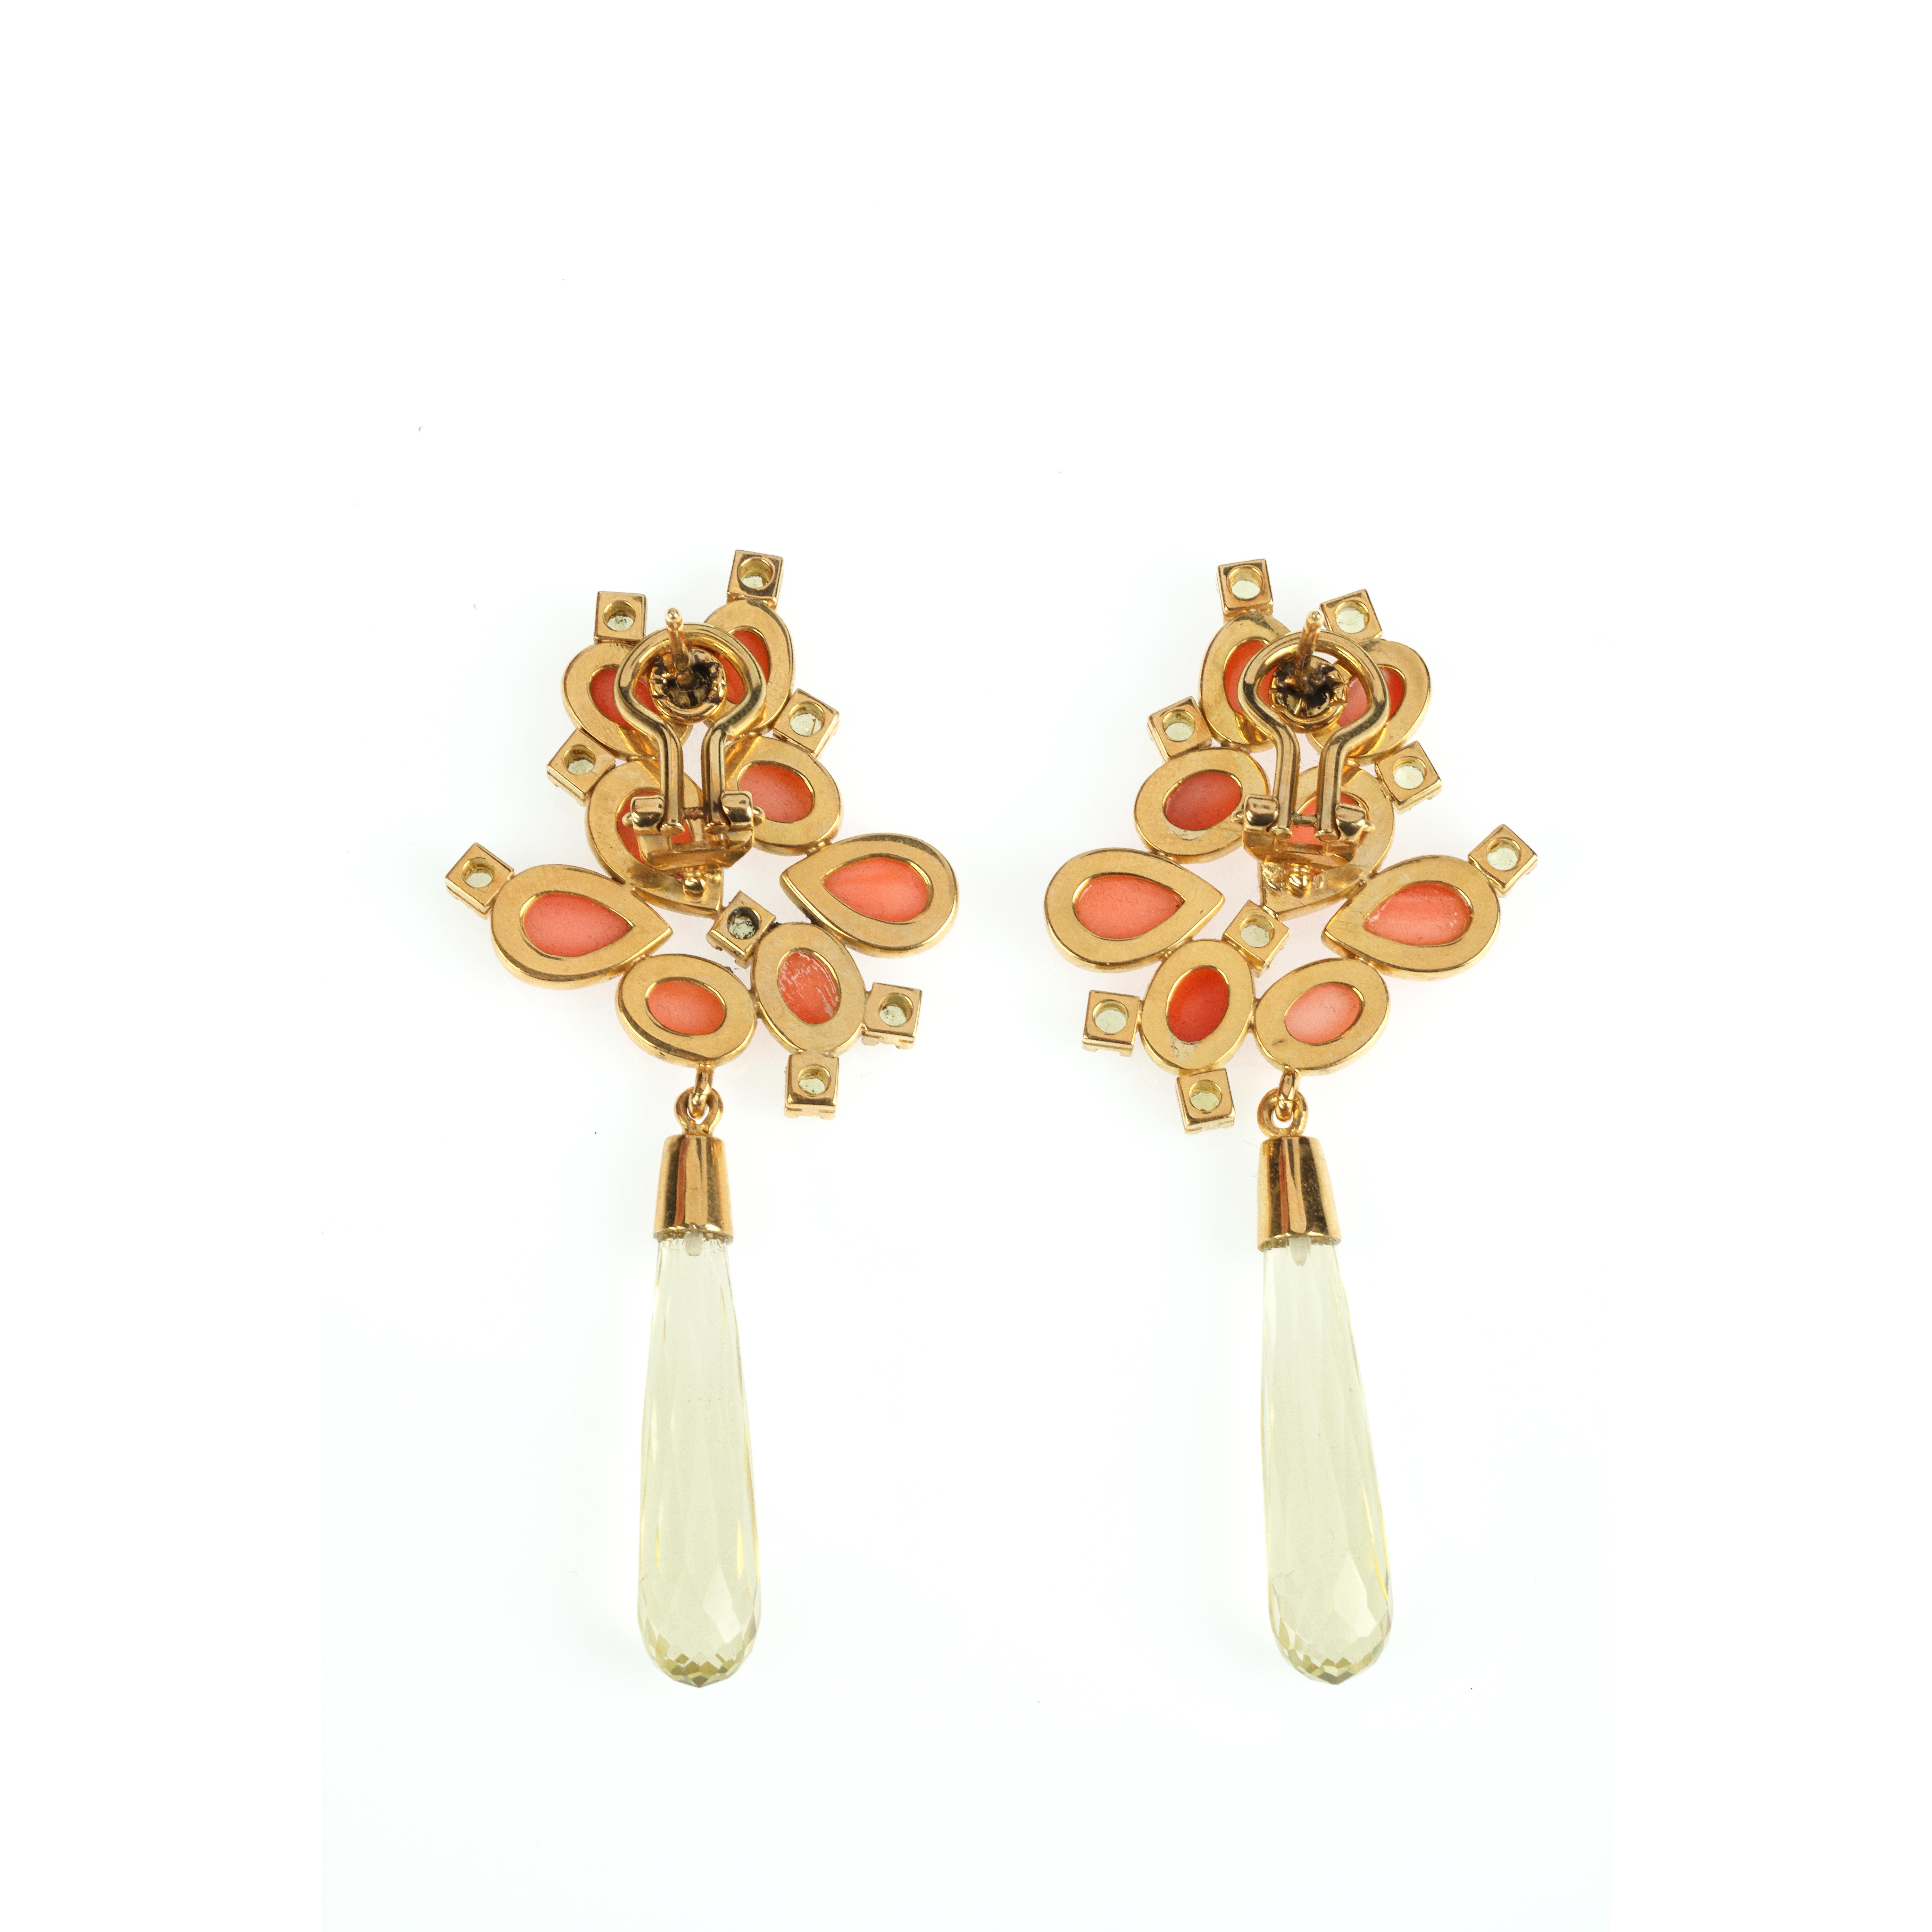 Gold Earring with sciacca coral and Peridot Drops gold 18k 17,80 gr.
All Giulia Colussi jewelry is new and has never been previously owned or worn. Each item will arrive at your door beautifully gift wrapped in our boxes, put inside an elegant pouch